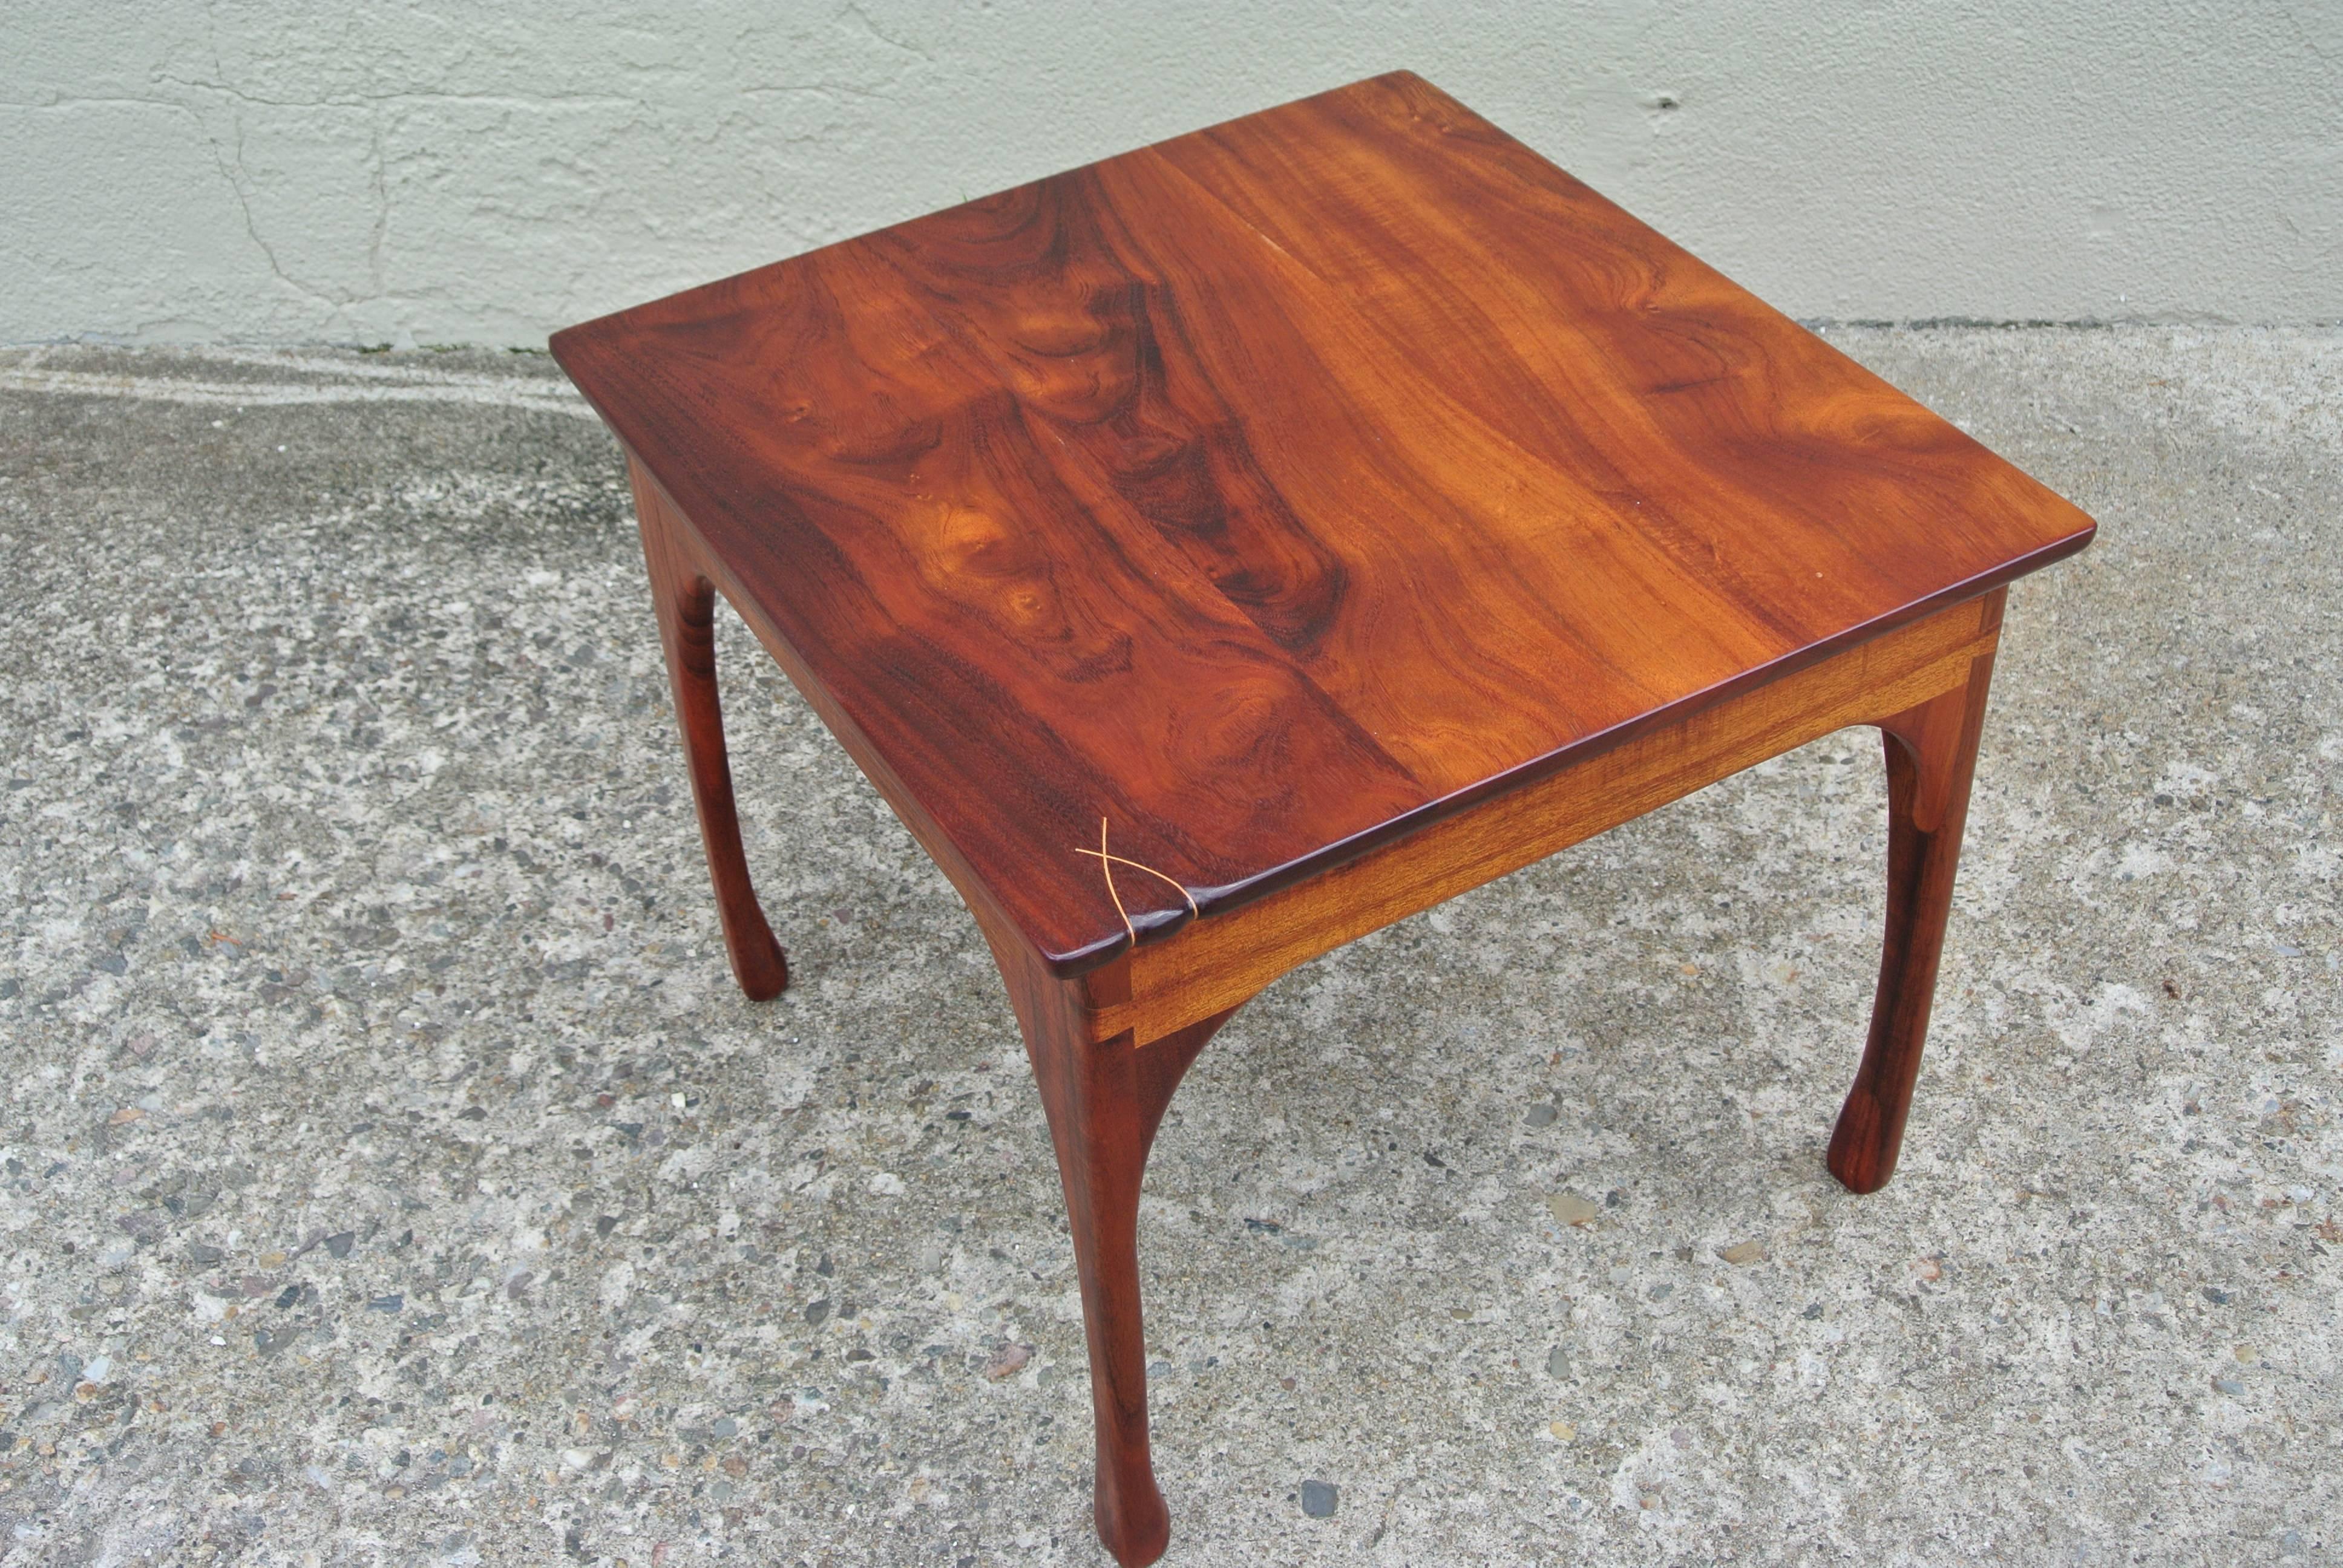 Beautiful custom Kona wood side table by Tom Deady. Sculpted brass details to the front edge and right front leg. Legs are fitted with dovetail notches.